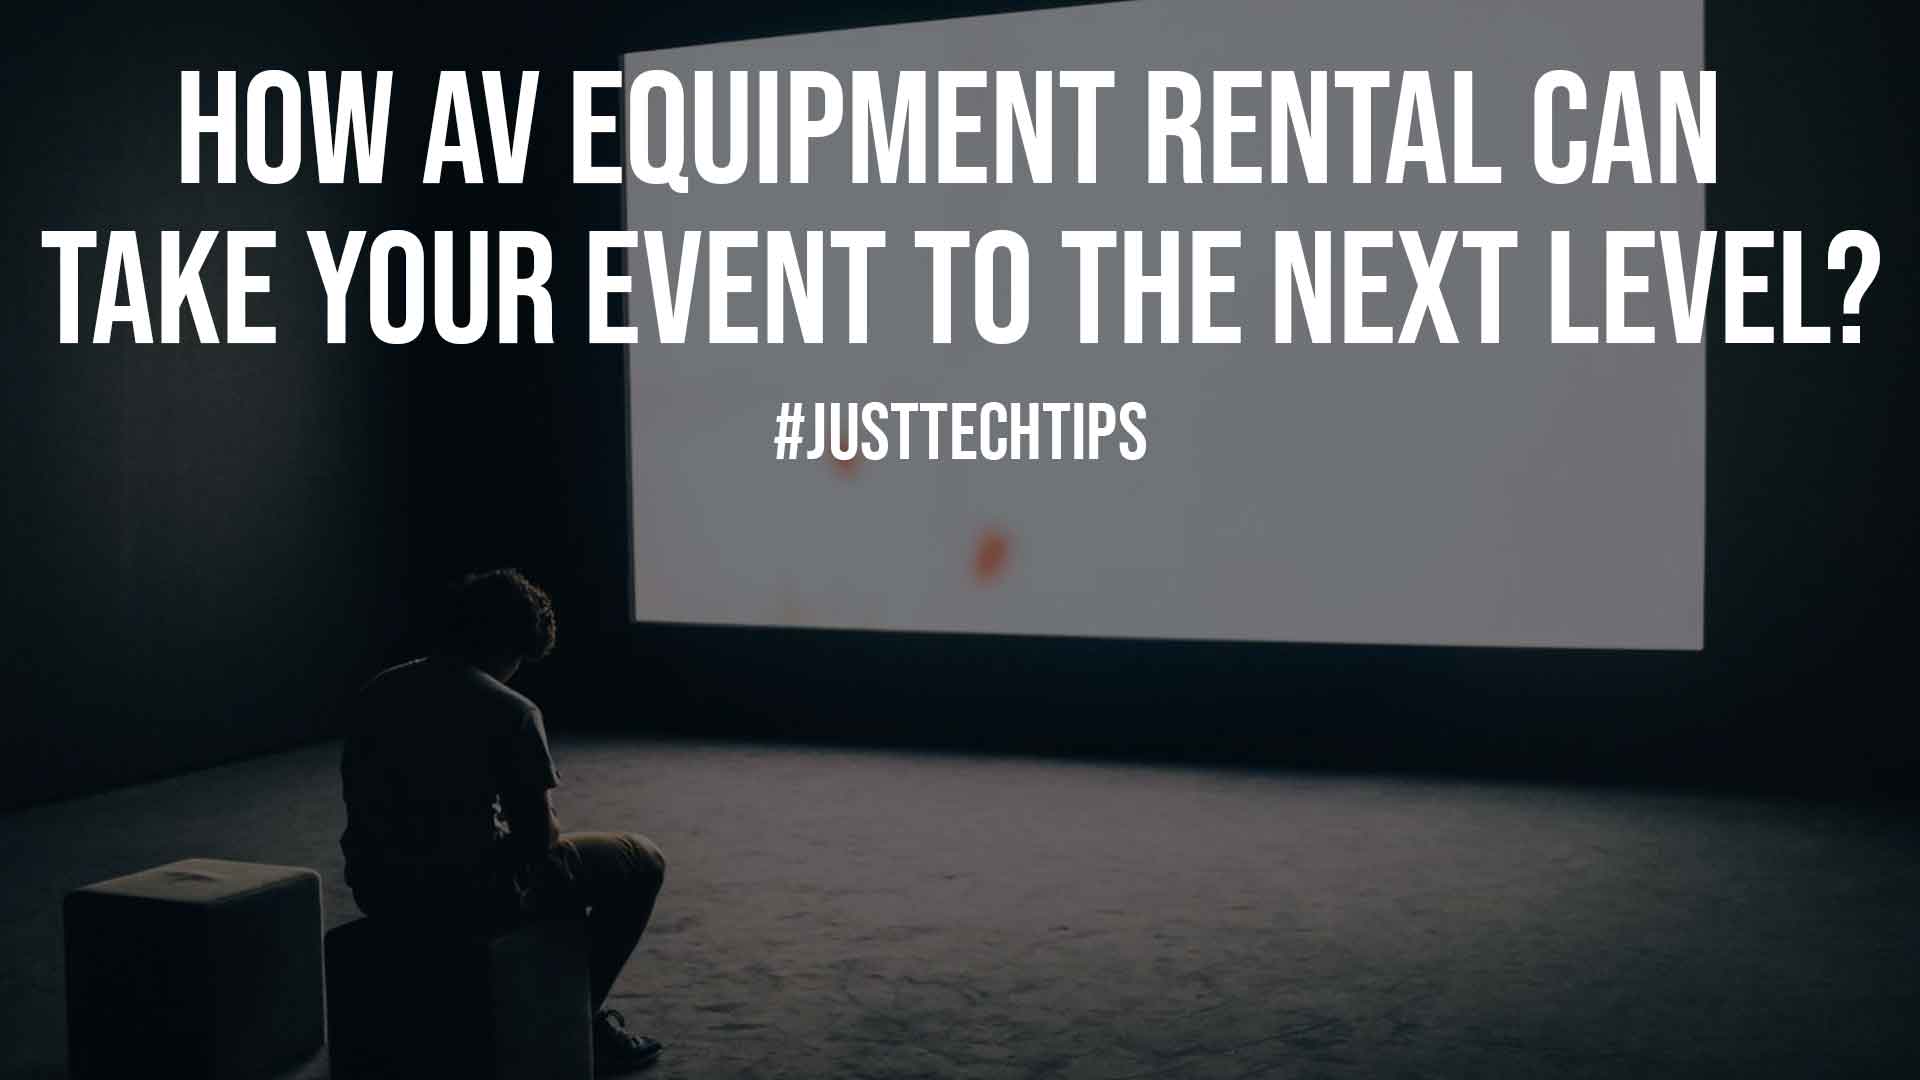 How AV Equipment Rental Can Take Your Event to the Next Level